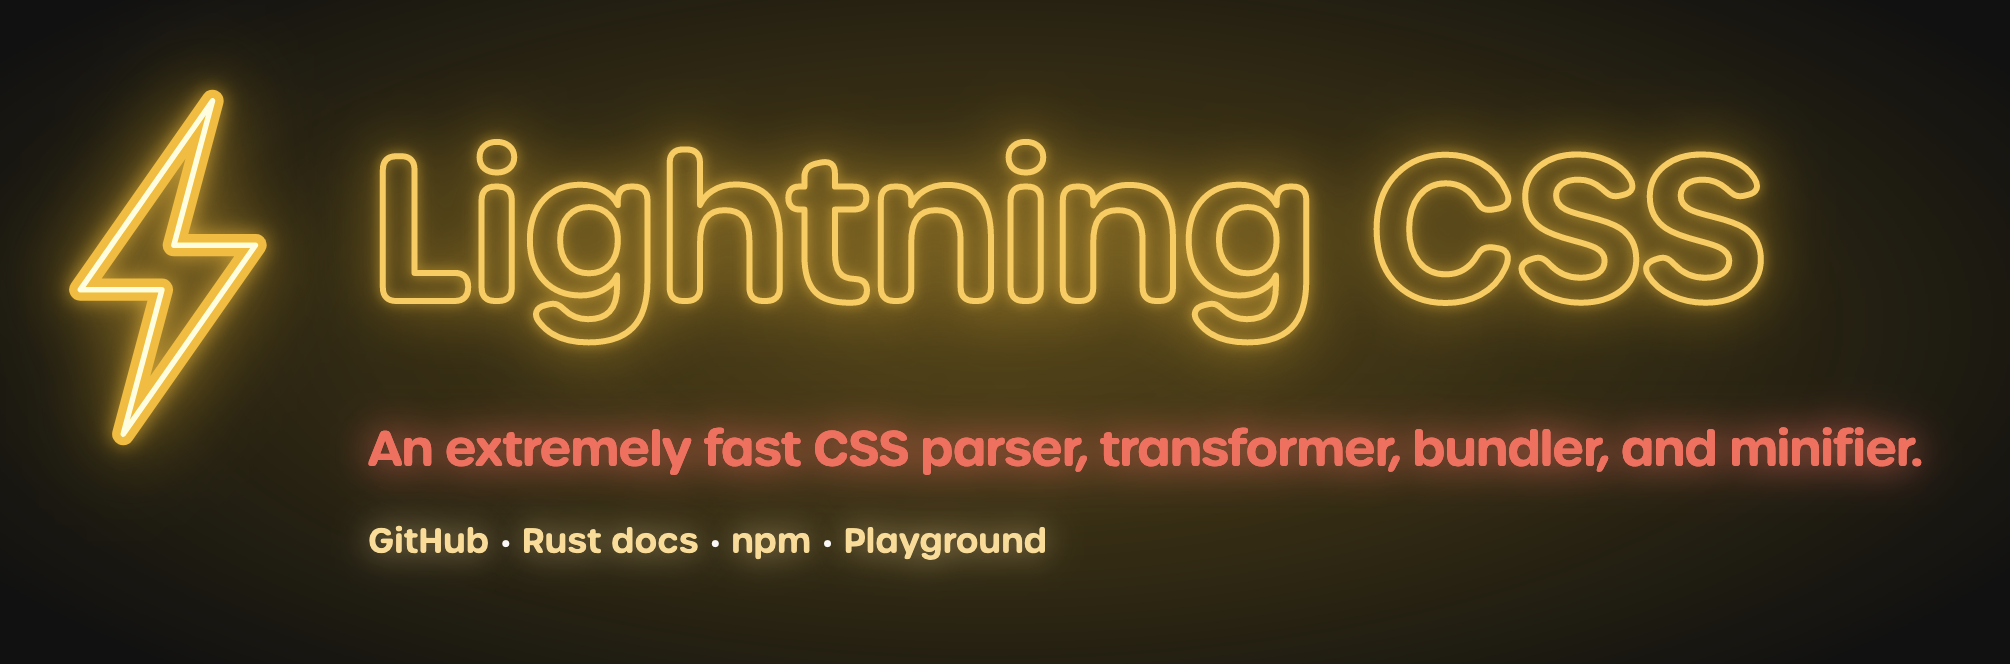 Lightning CSS – An extremely fast CSS parser, transformer, bundler, and minifier.